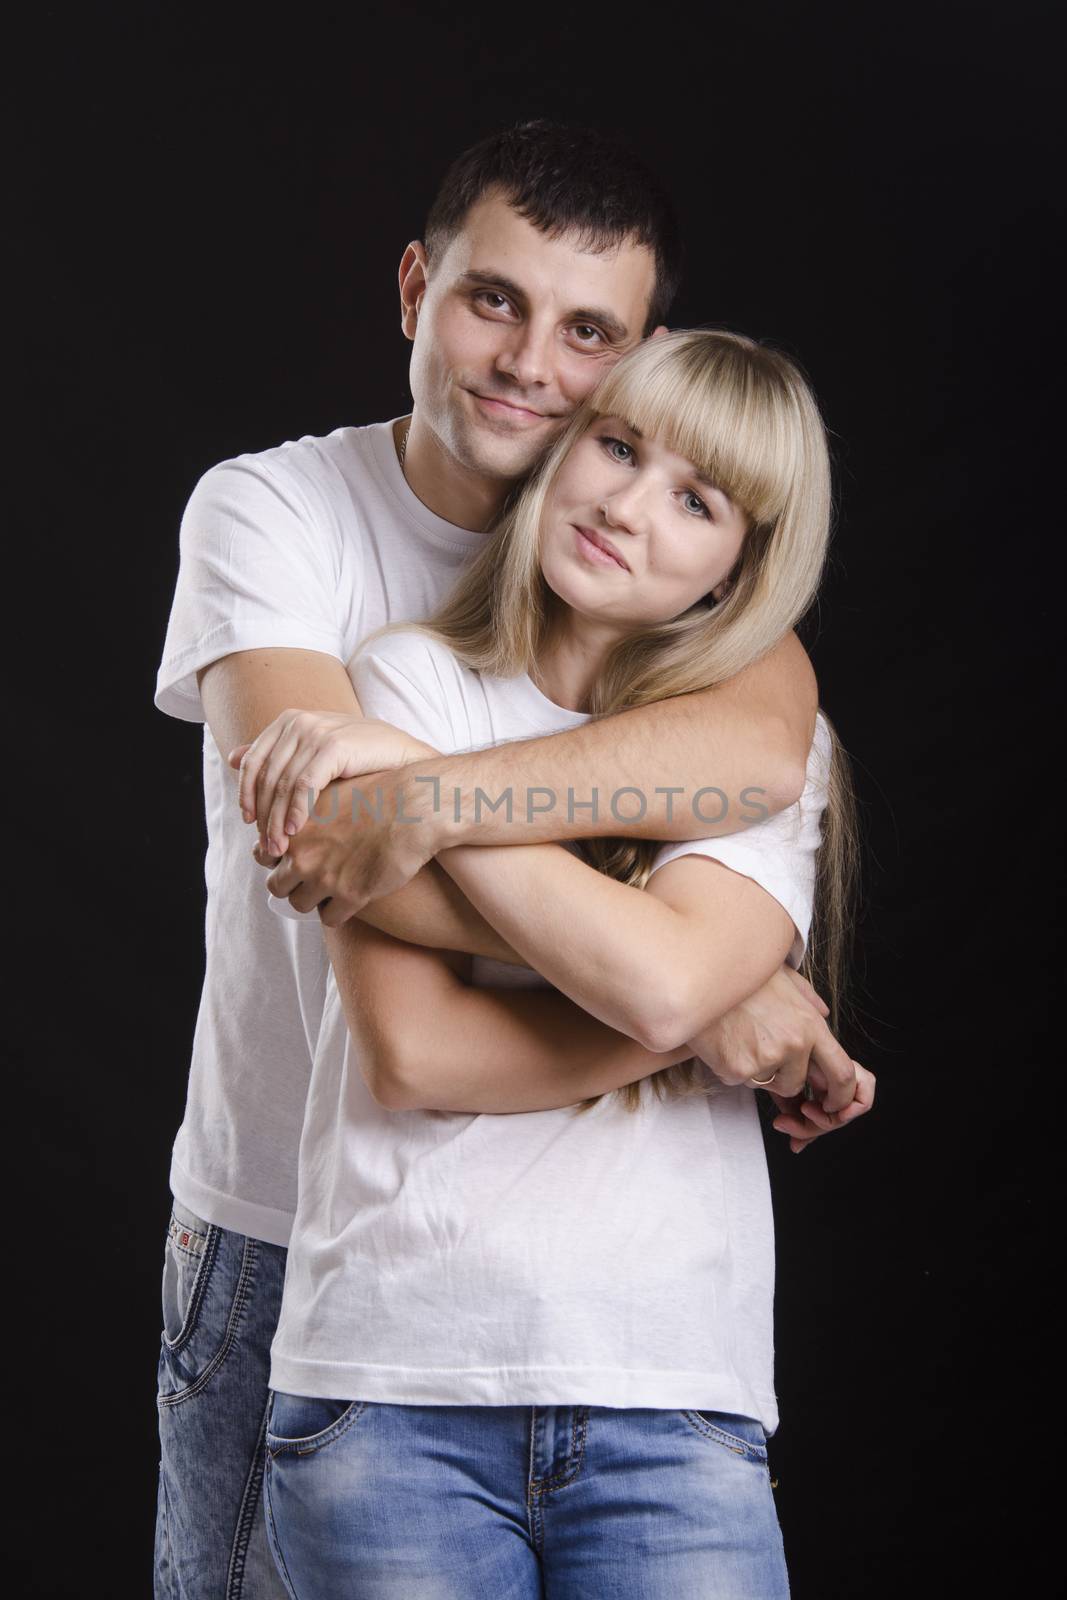 Portrait of a young couple on black background by Madhourse